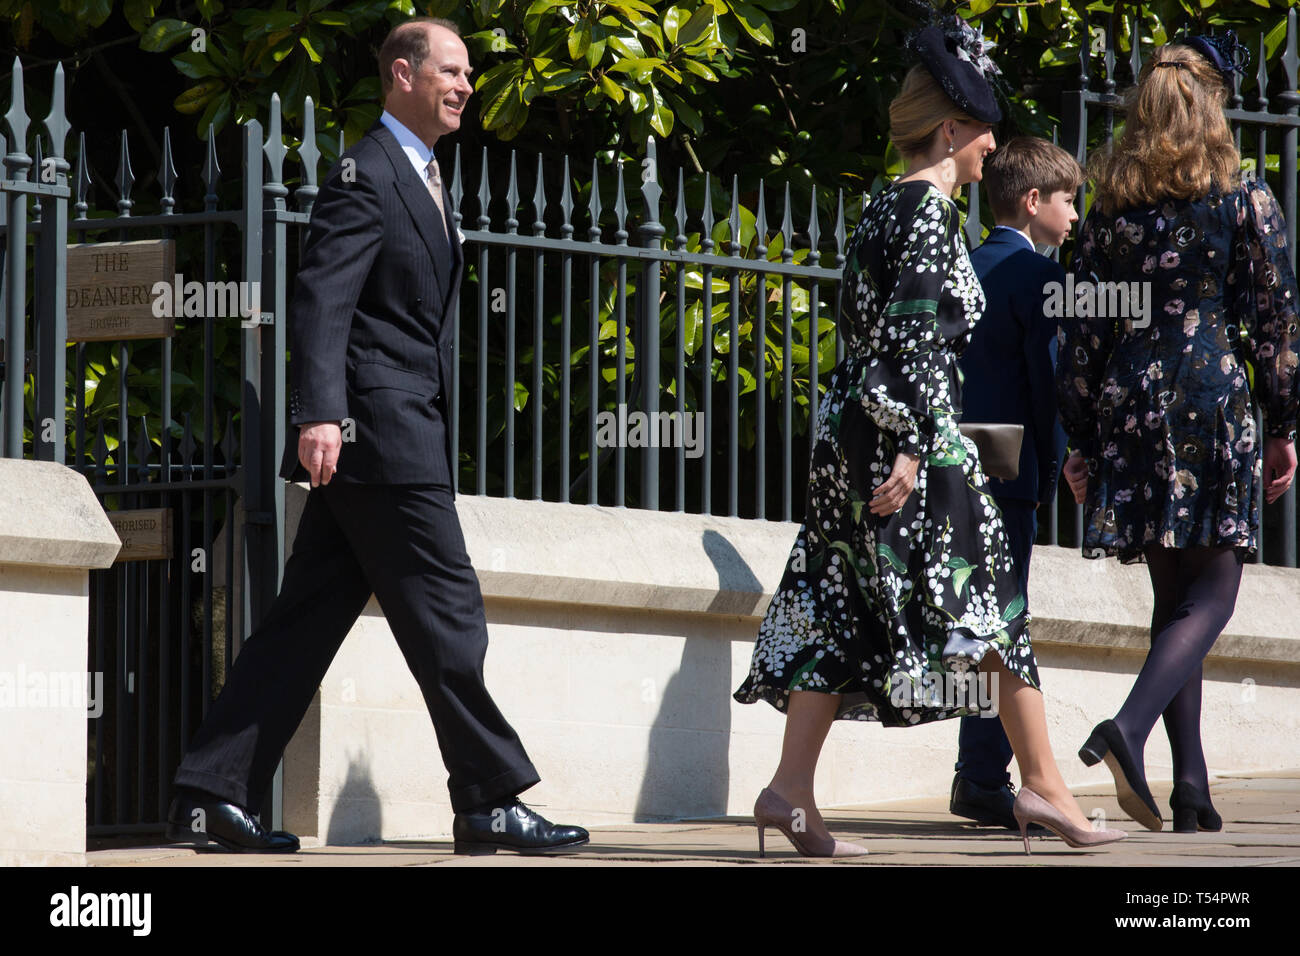 Windsor, UK. 21st April 2019. The Earl and Countess of Wessex, James, Viscount Severn, and Lady Louise Windsor leave St George's Chapel in Windsor Castle after attending the Easter Sunday service. Credit: Mark Kerrison/Alamy Live News Stock Photo